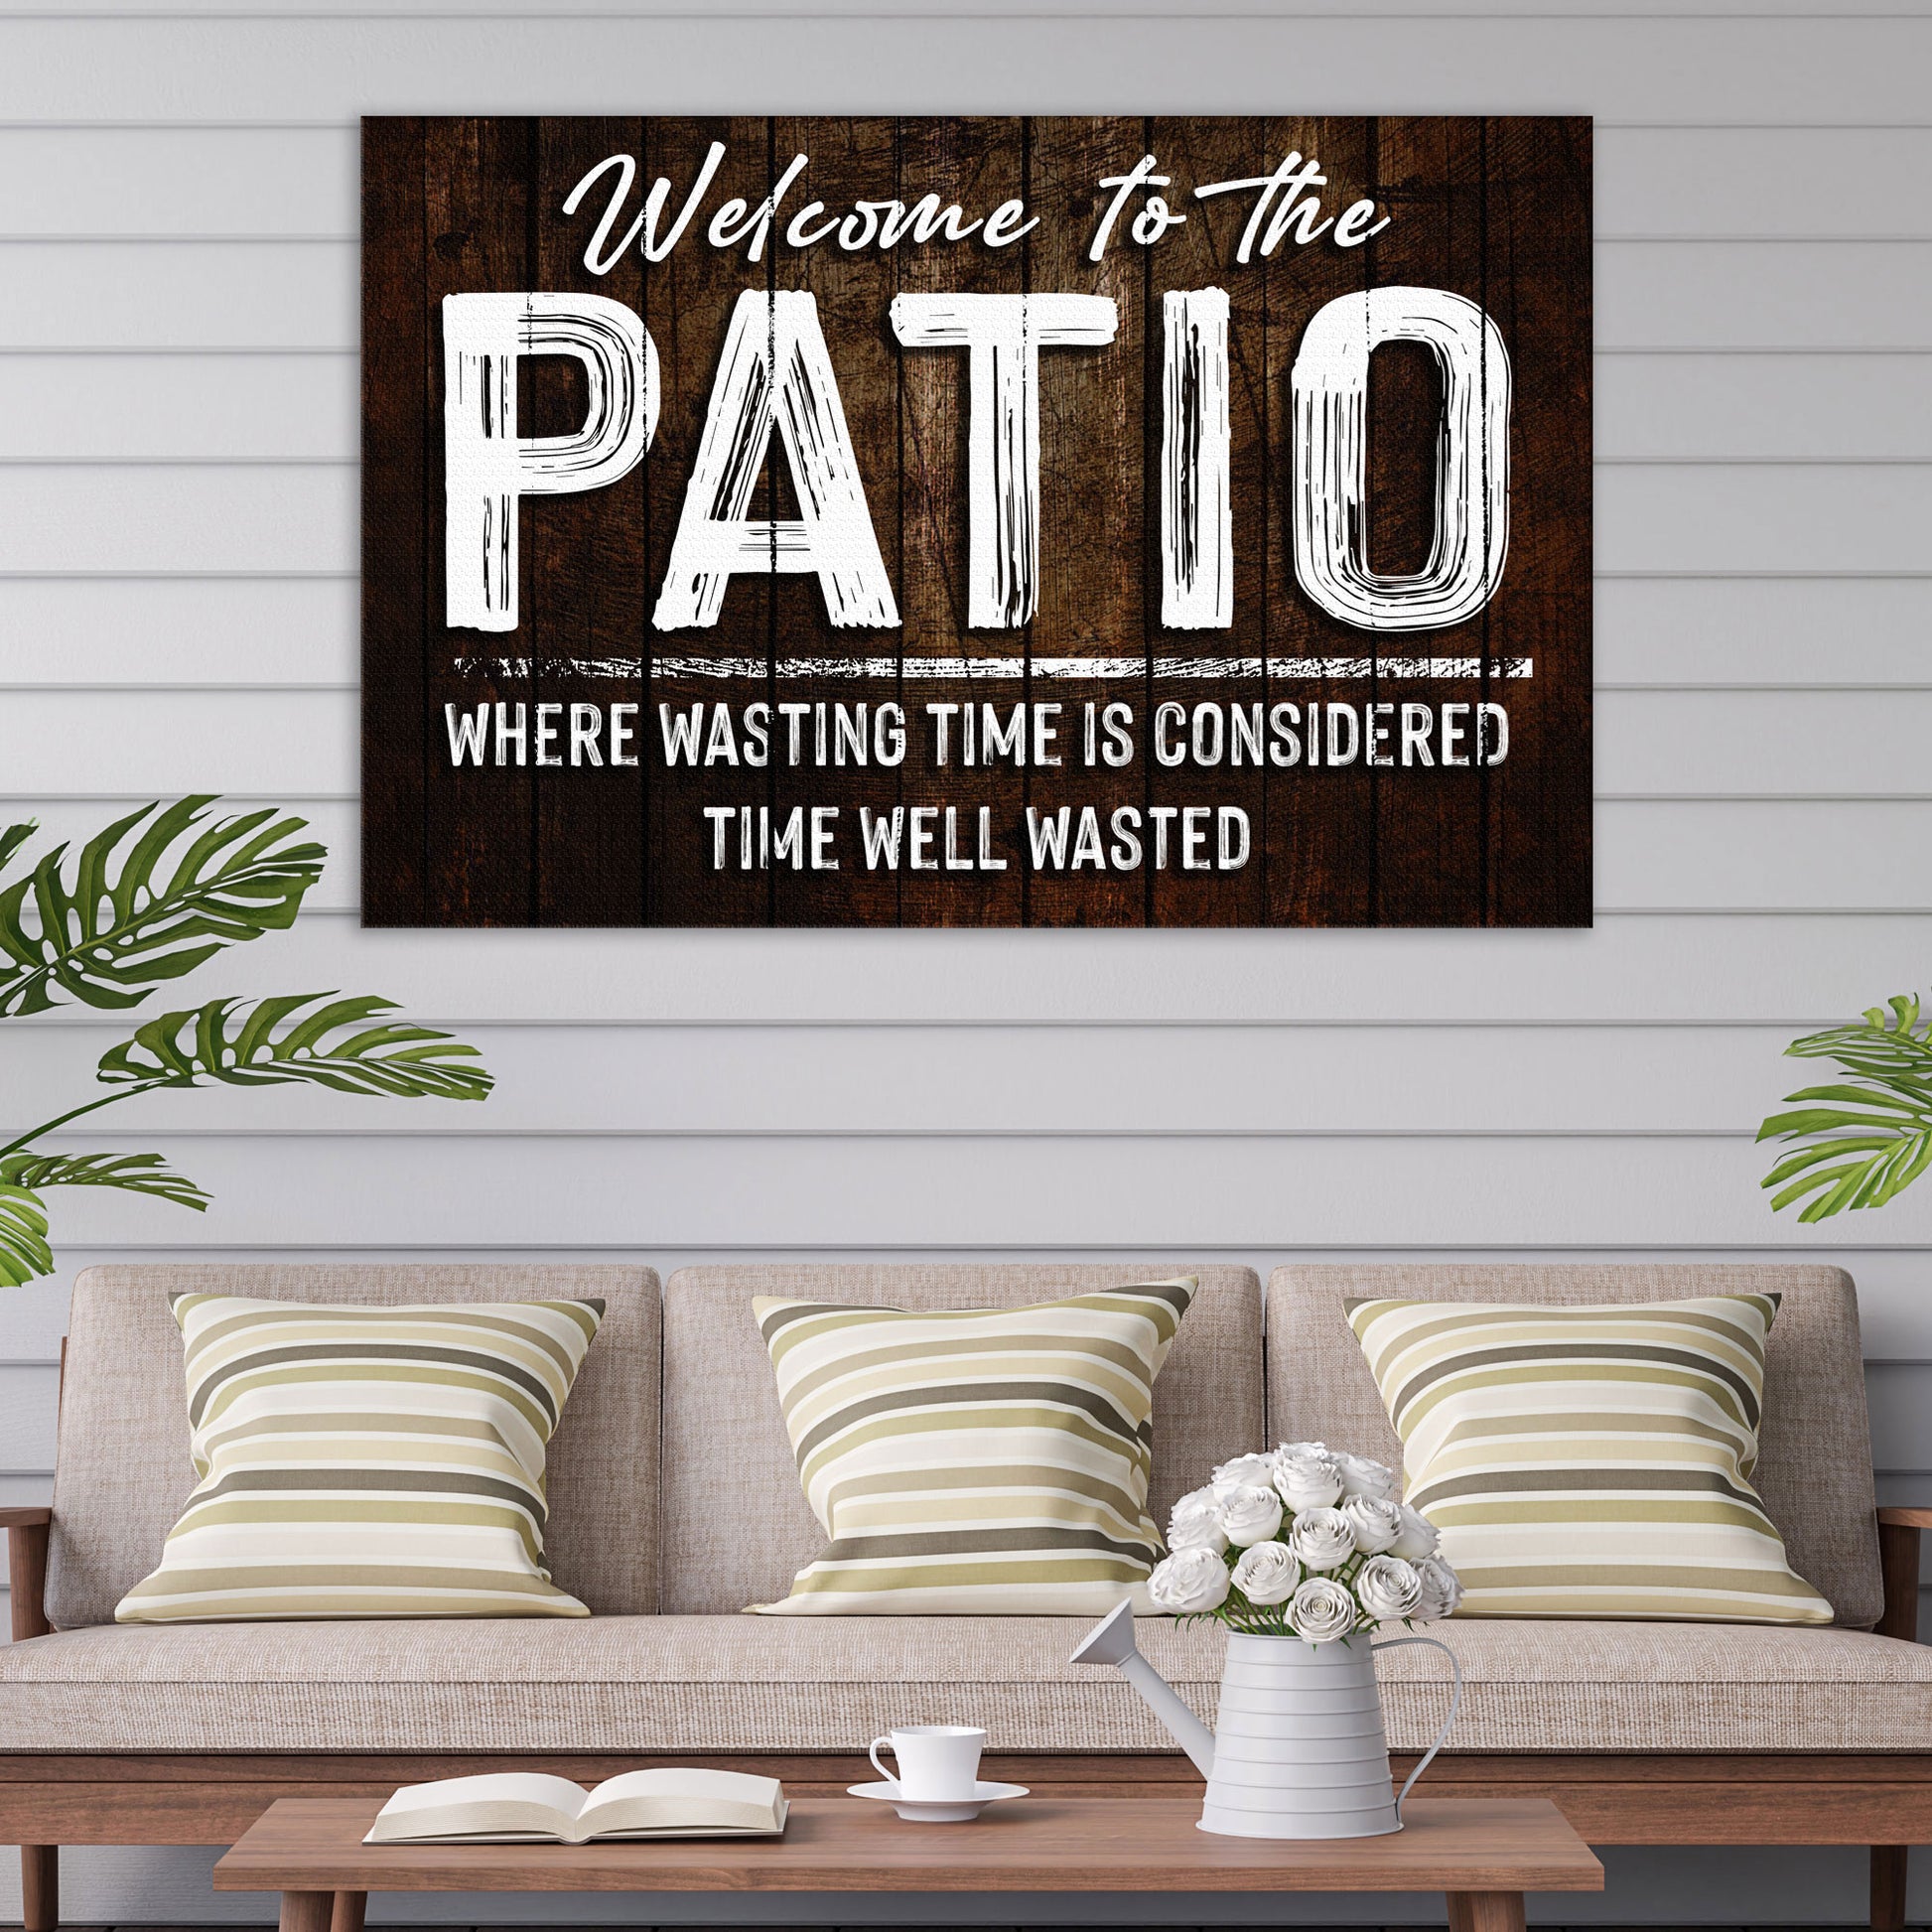 Welcome To The Patio Sign - Image by Tailored Canvases